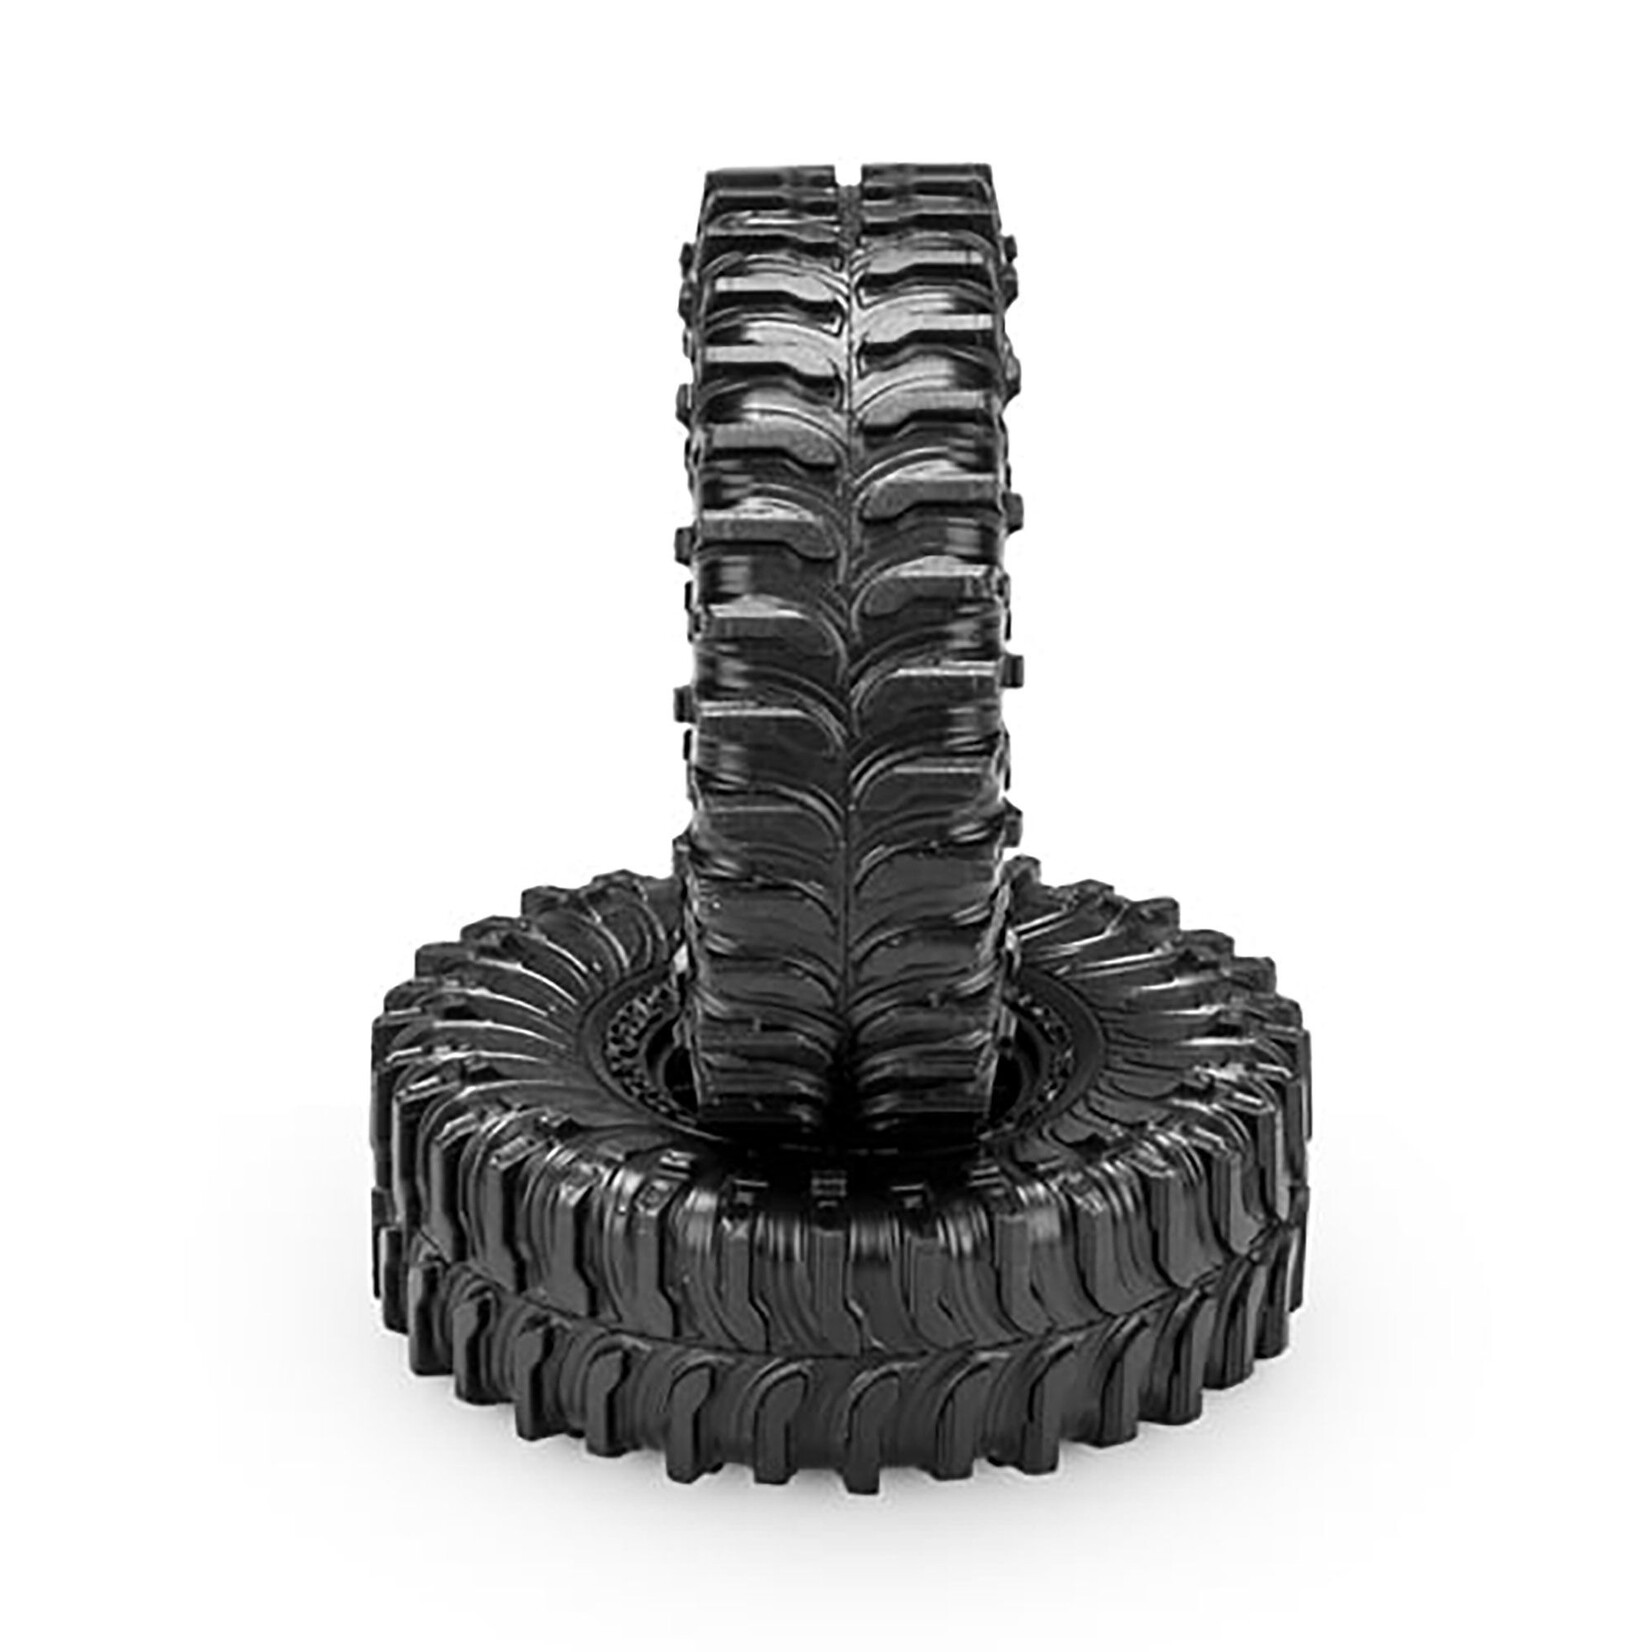 JConcepts 1/24 The Hold 1.0" Crawler Tires and Inserts, Green Compound (2)